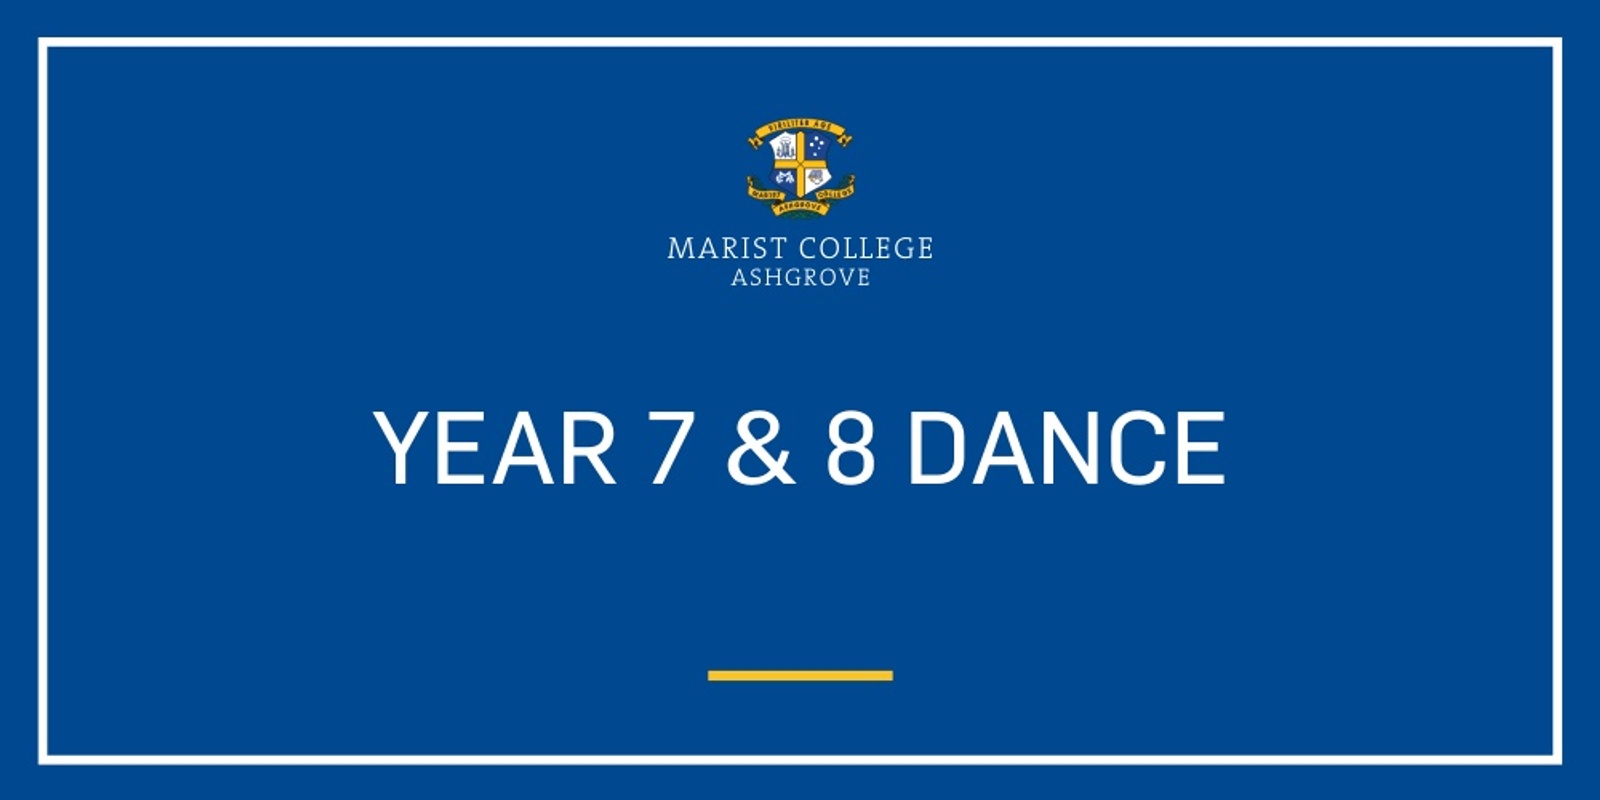 Banner image for Marist College Ashgrove Year 7 & 8 Dance - Marist College Ashgrove Students RSVP